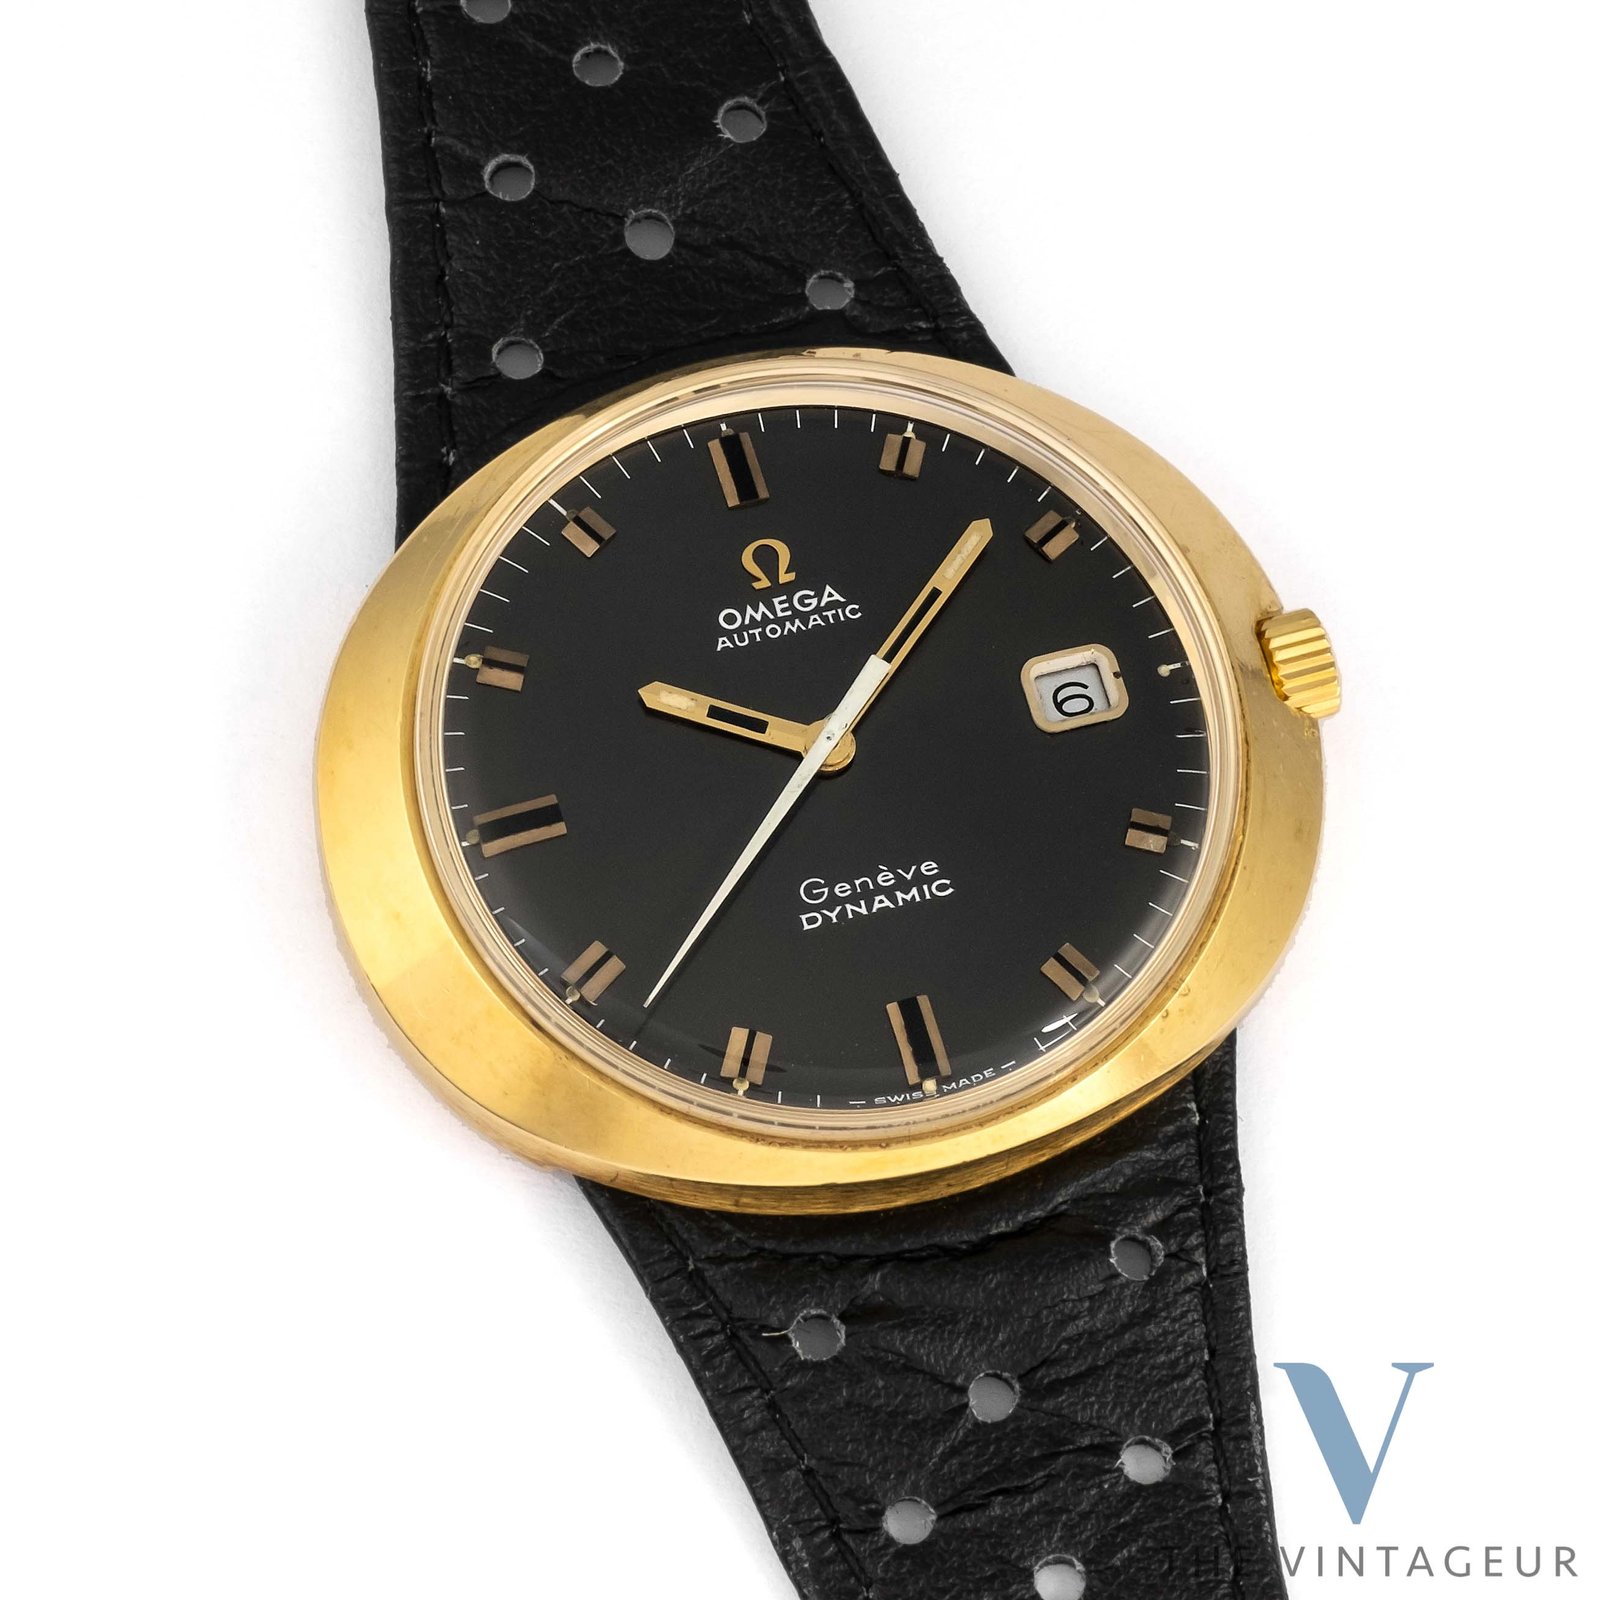 Omega Genève dynamic automatic 18k solid yellow gold case